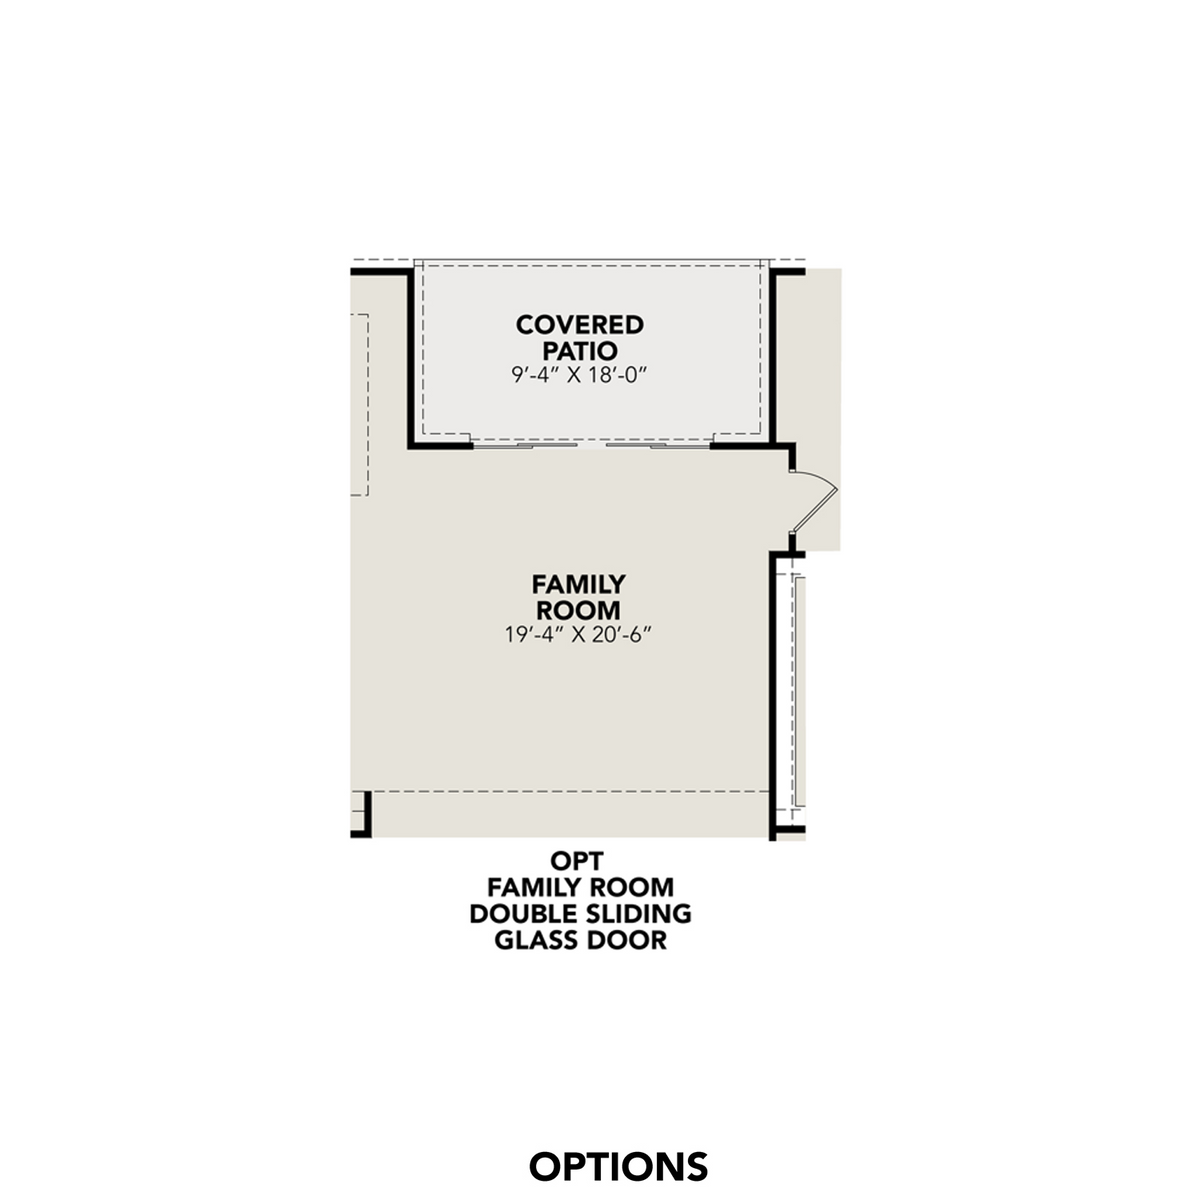 5 - The Jennings H buildable floor plan layout in Davidson Homes' Ladera community.